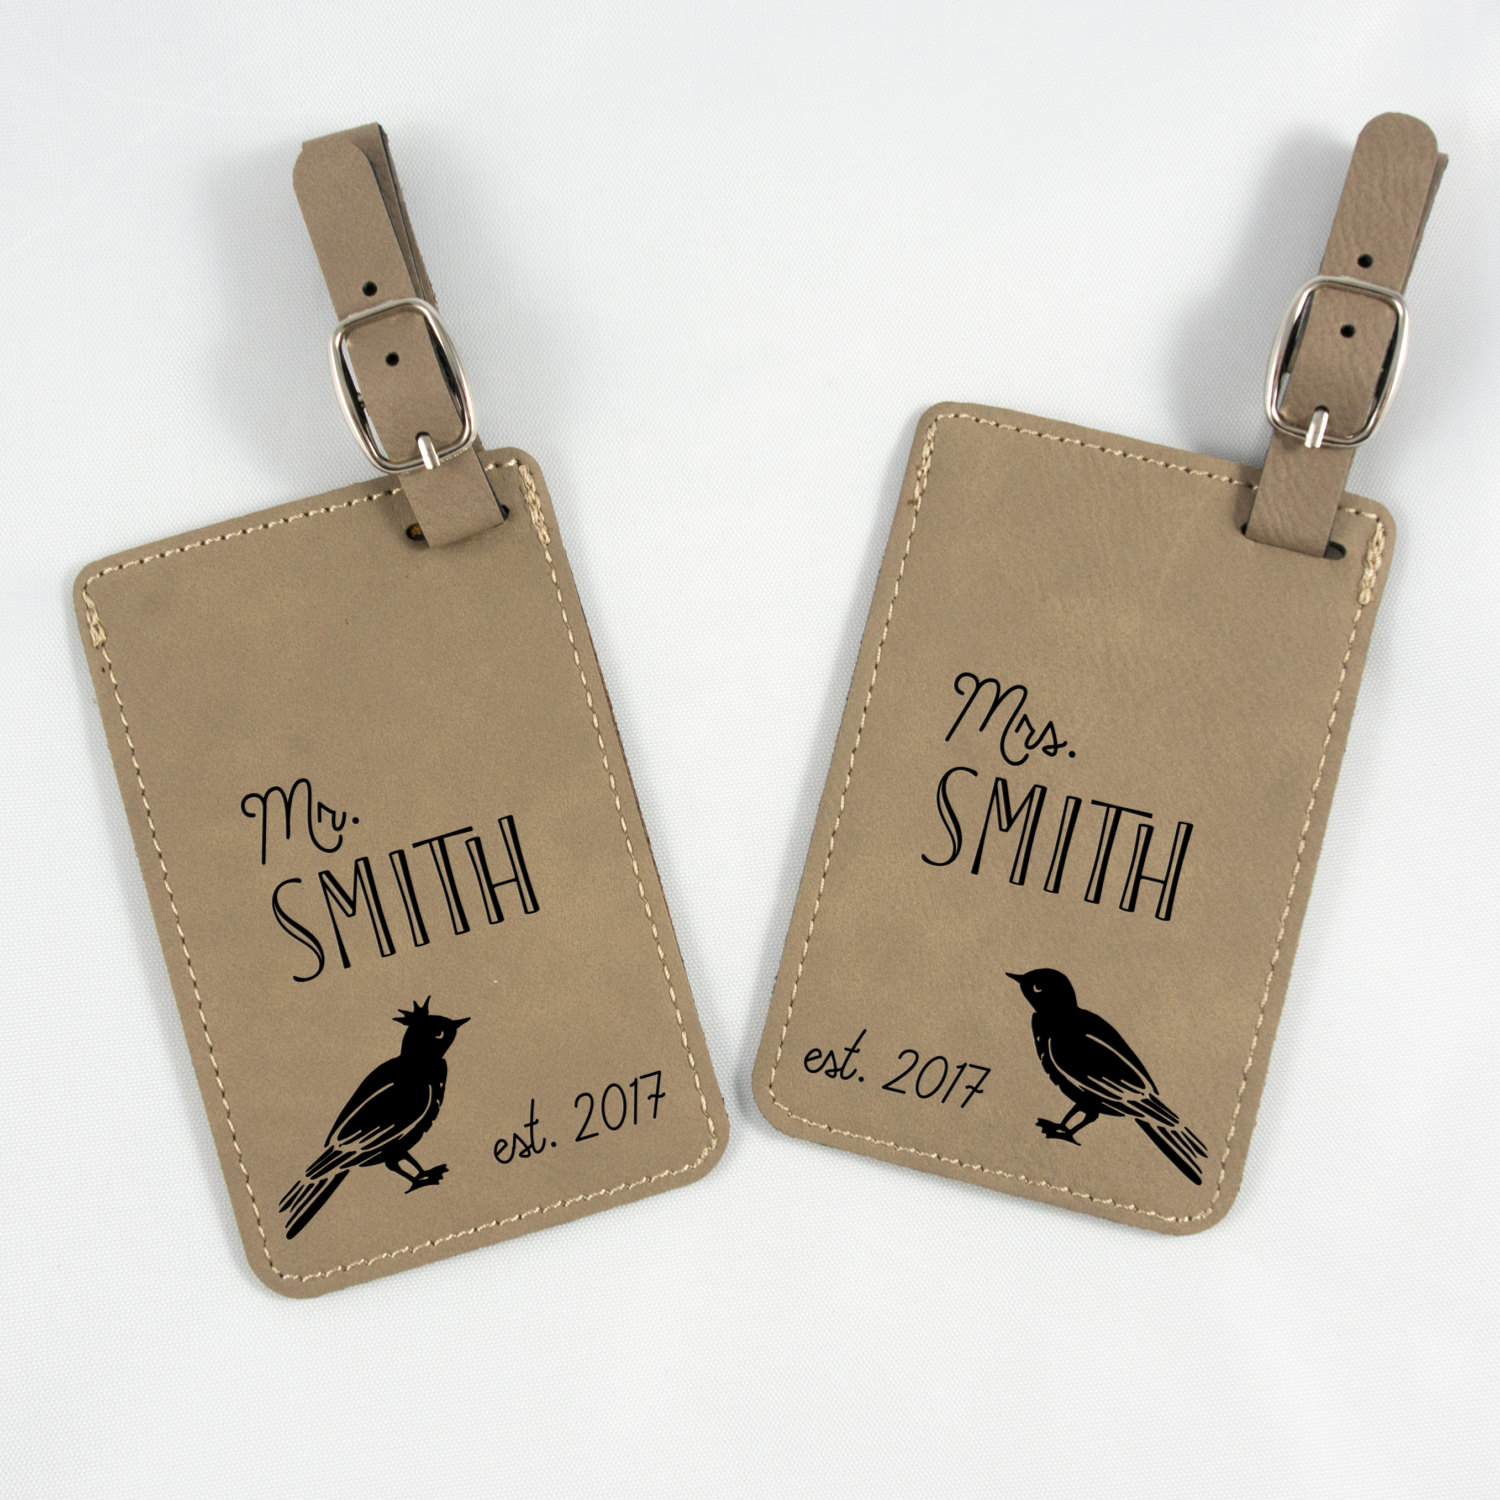 where to buy personalized luggage tags